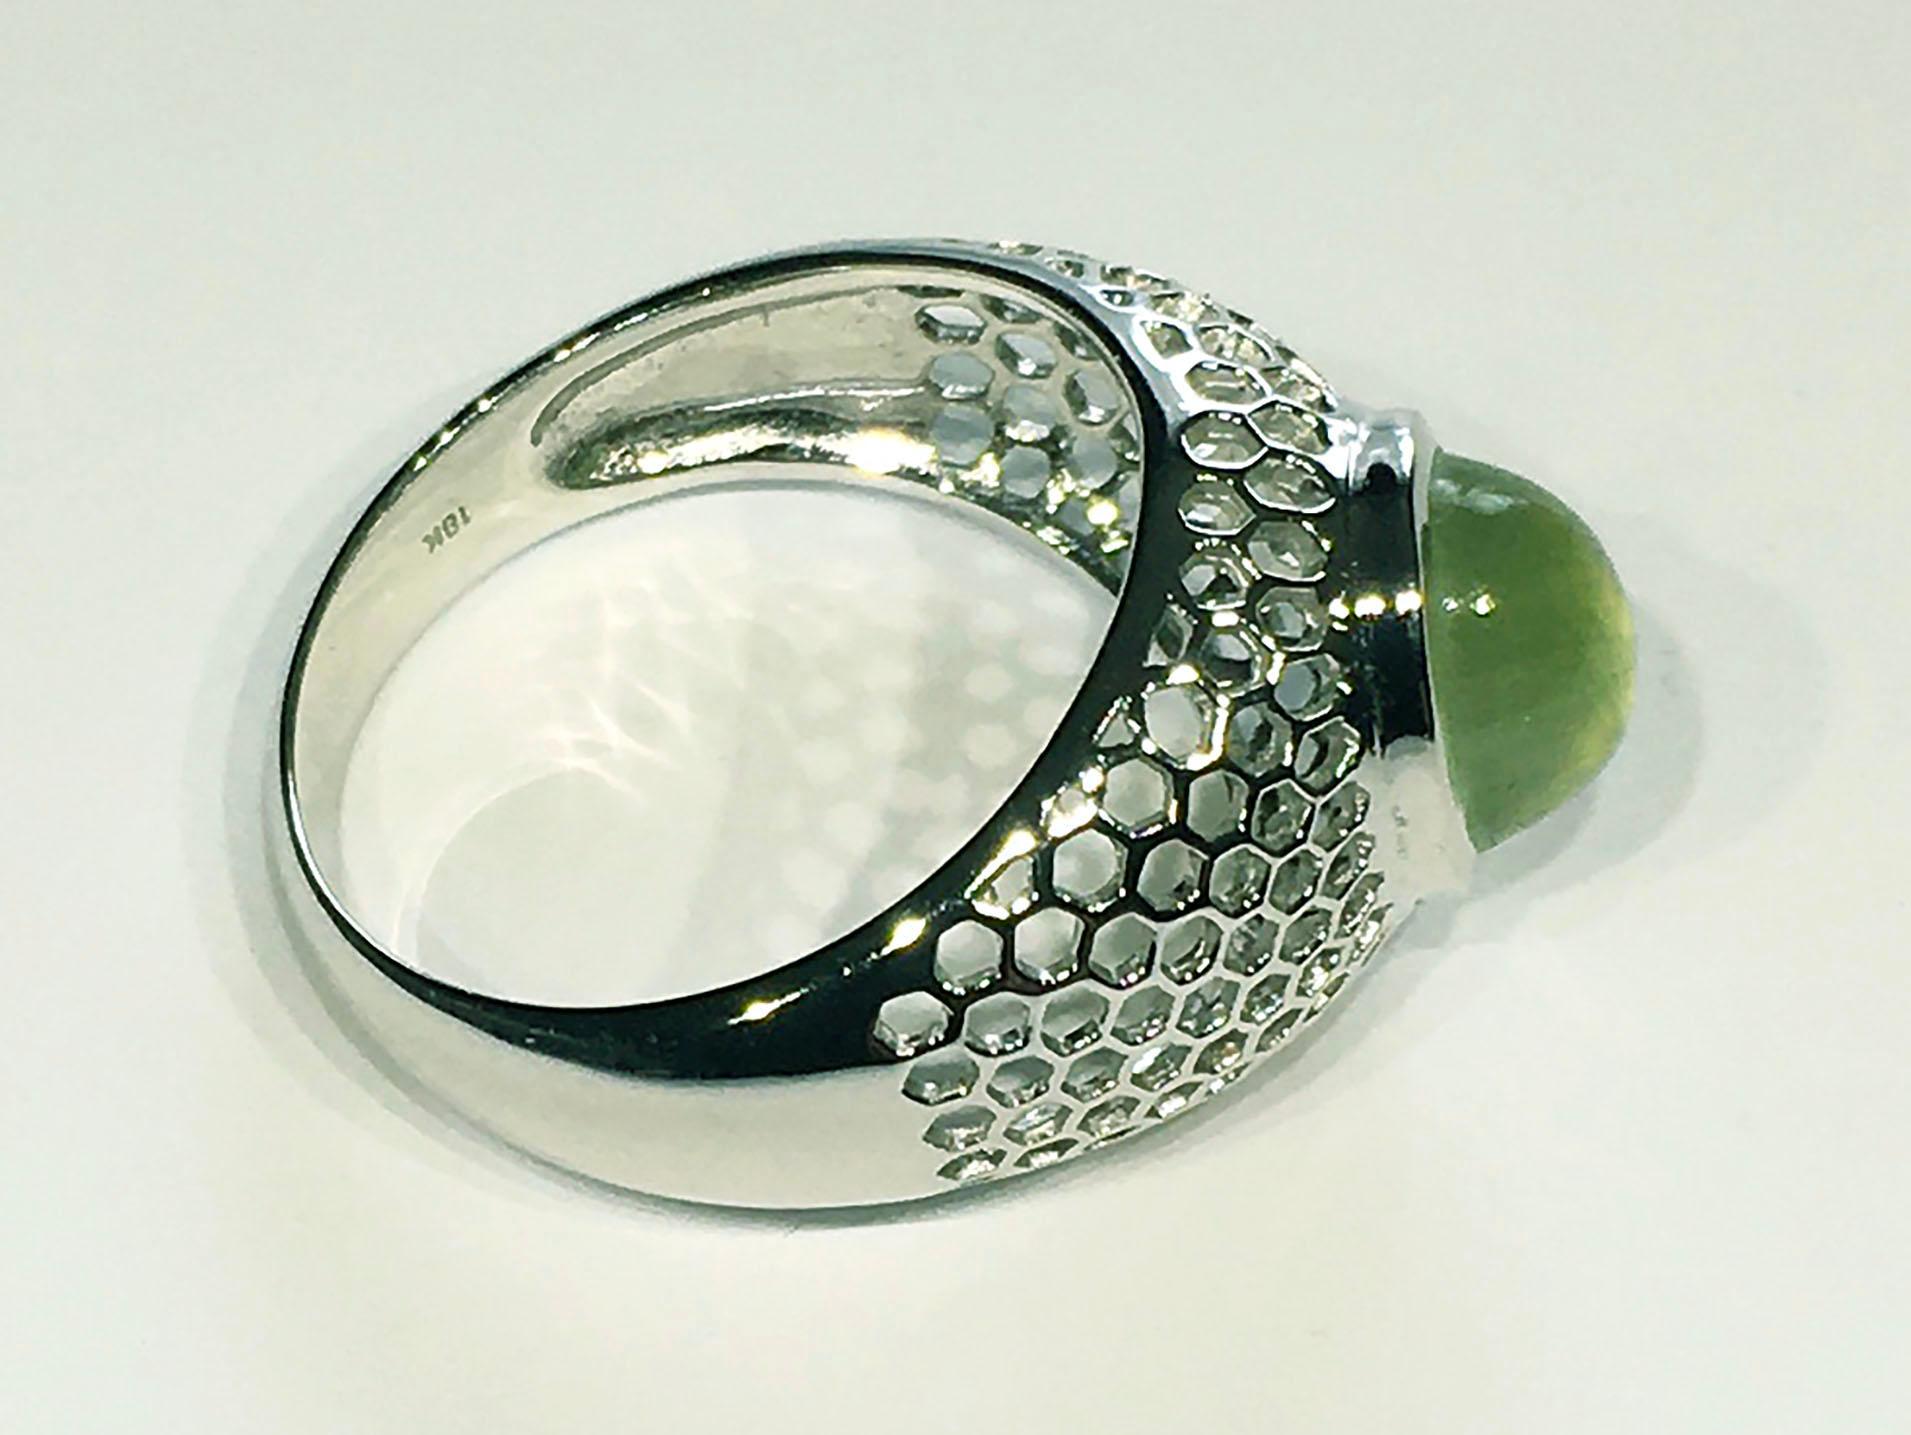 An Green Zambian Prehnite Cabochon Ring set in 18kt White Gold For Sale 1